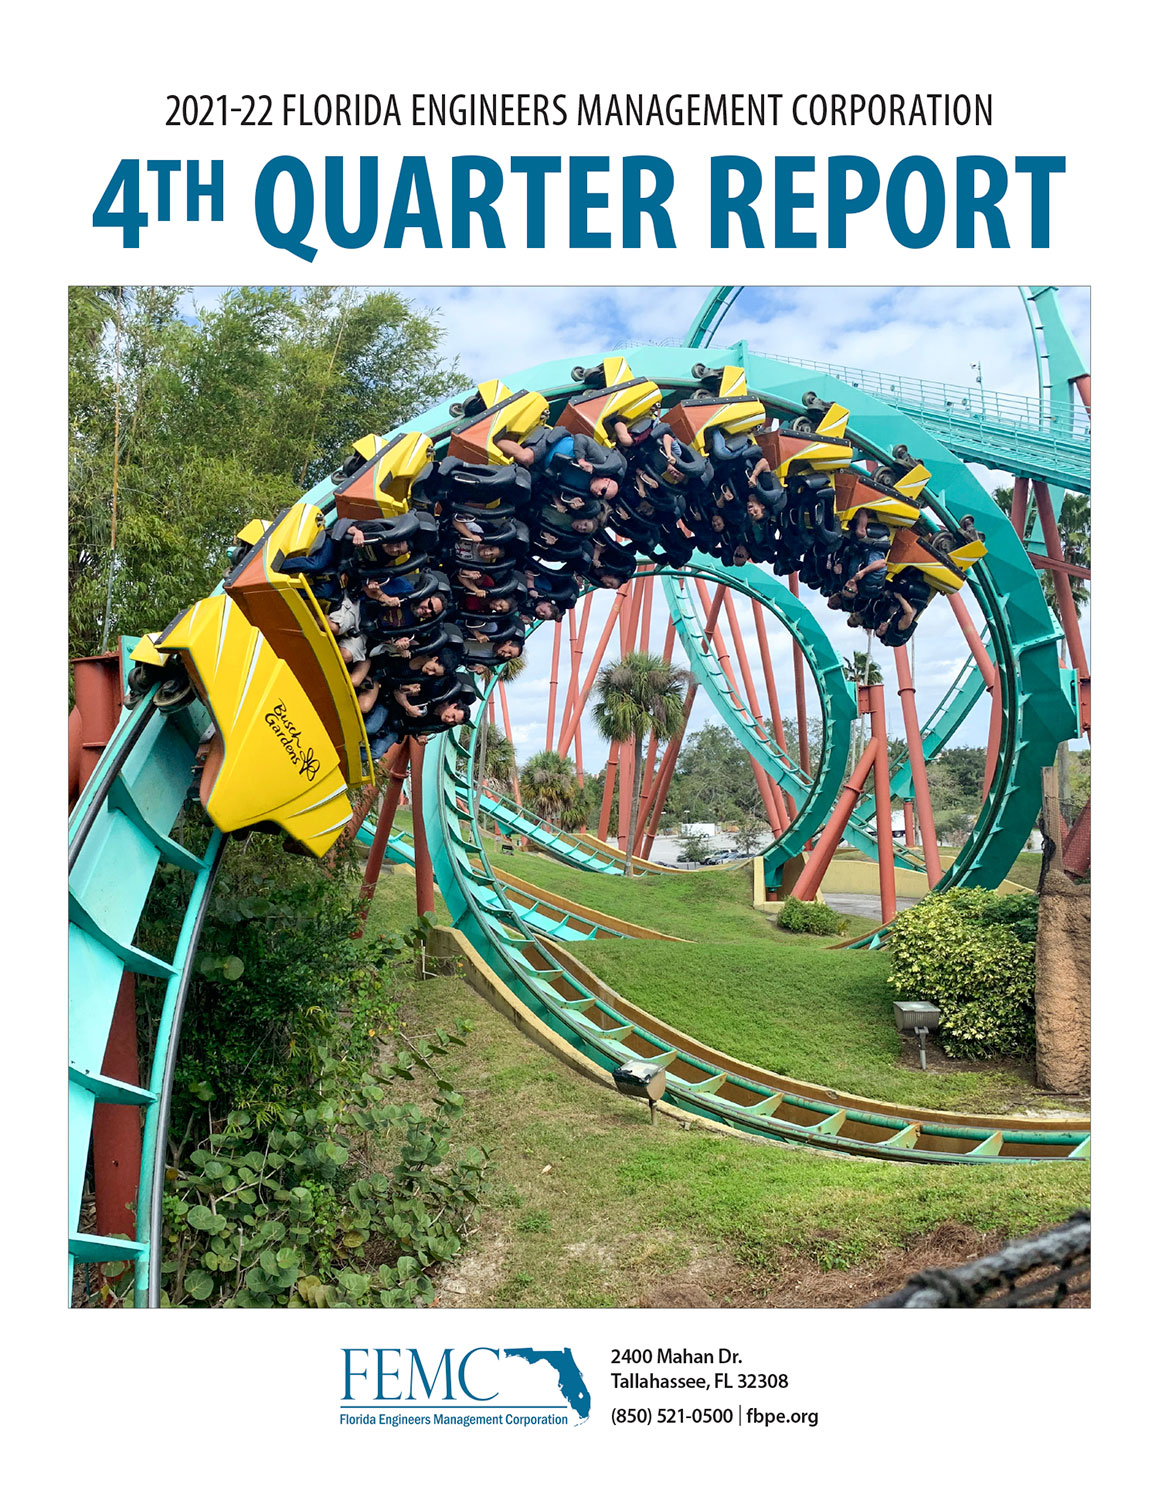 The cover of the 2021-22 Florida Engineers Management Corporation 4th Quarter Report